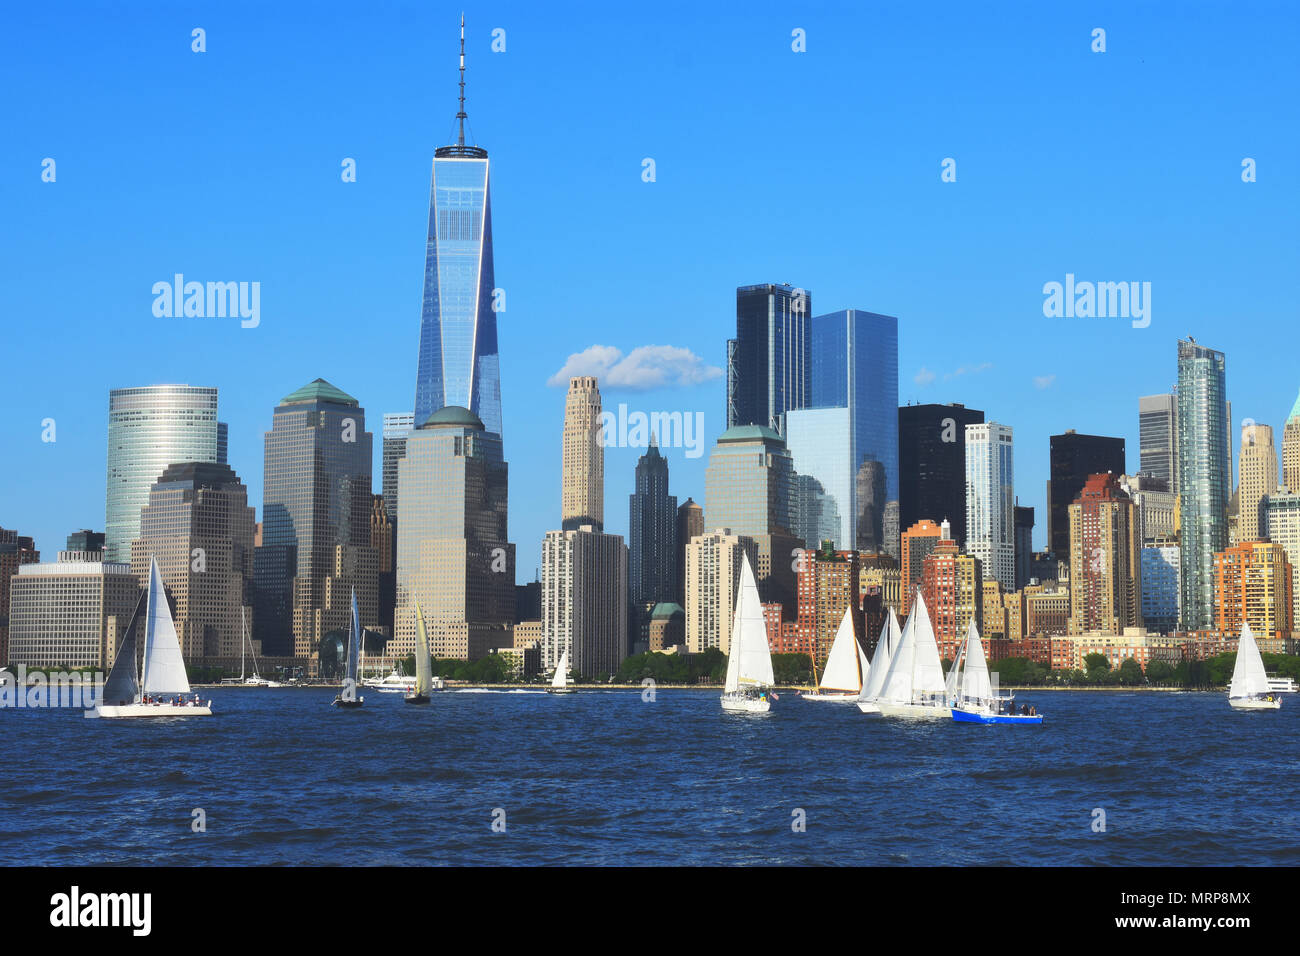 View of the NYC World Financial Center and Battery Park from Liberty State Park in Jersey City, NJ Stock Photo